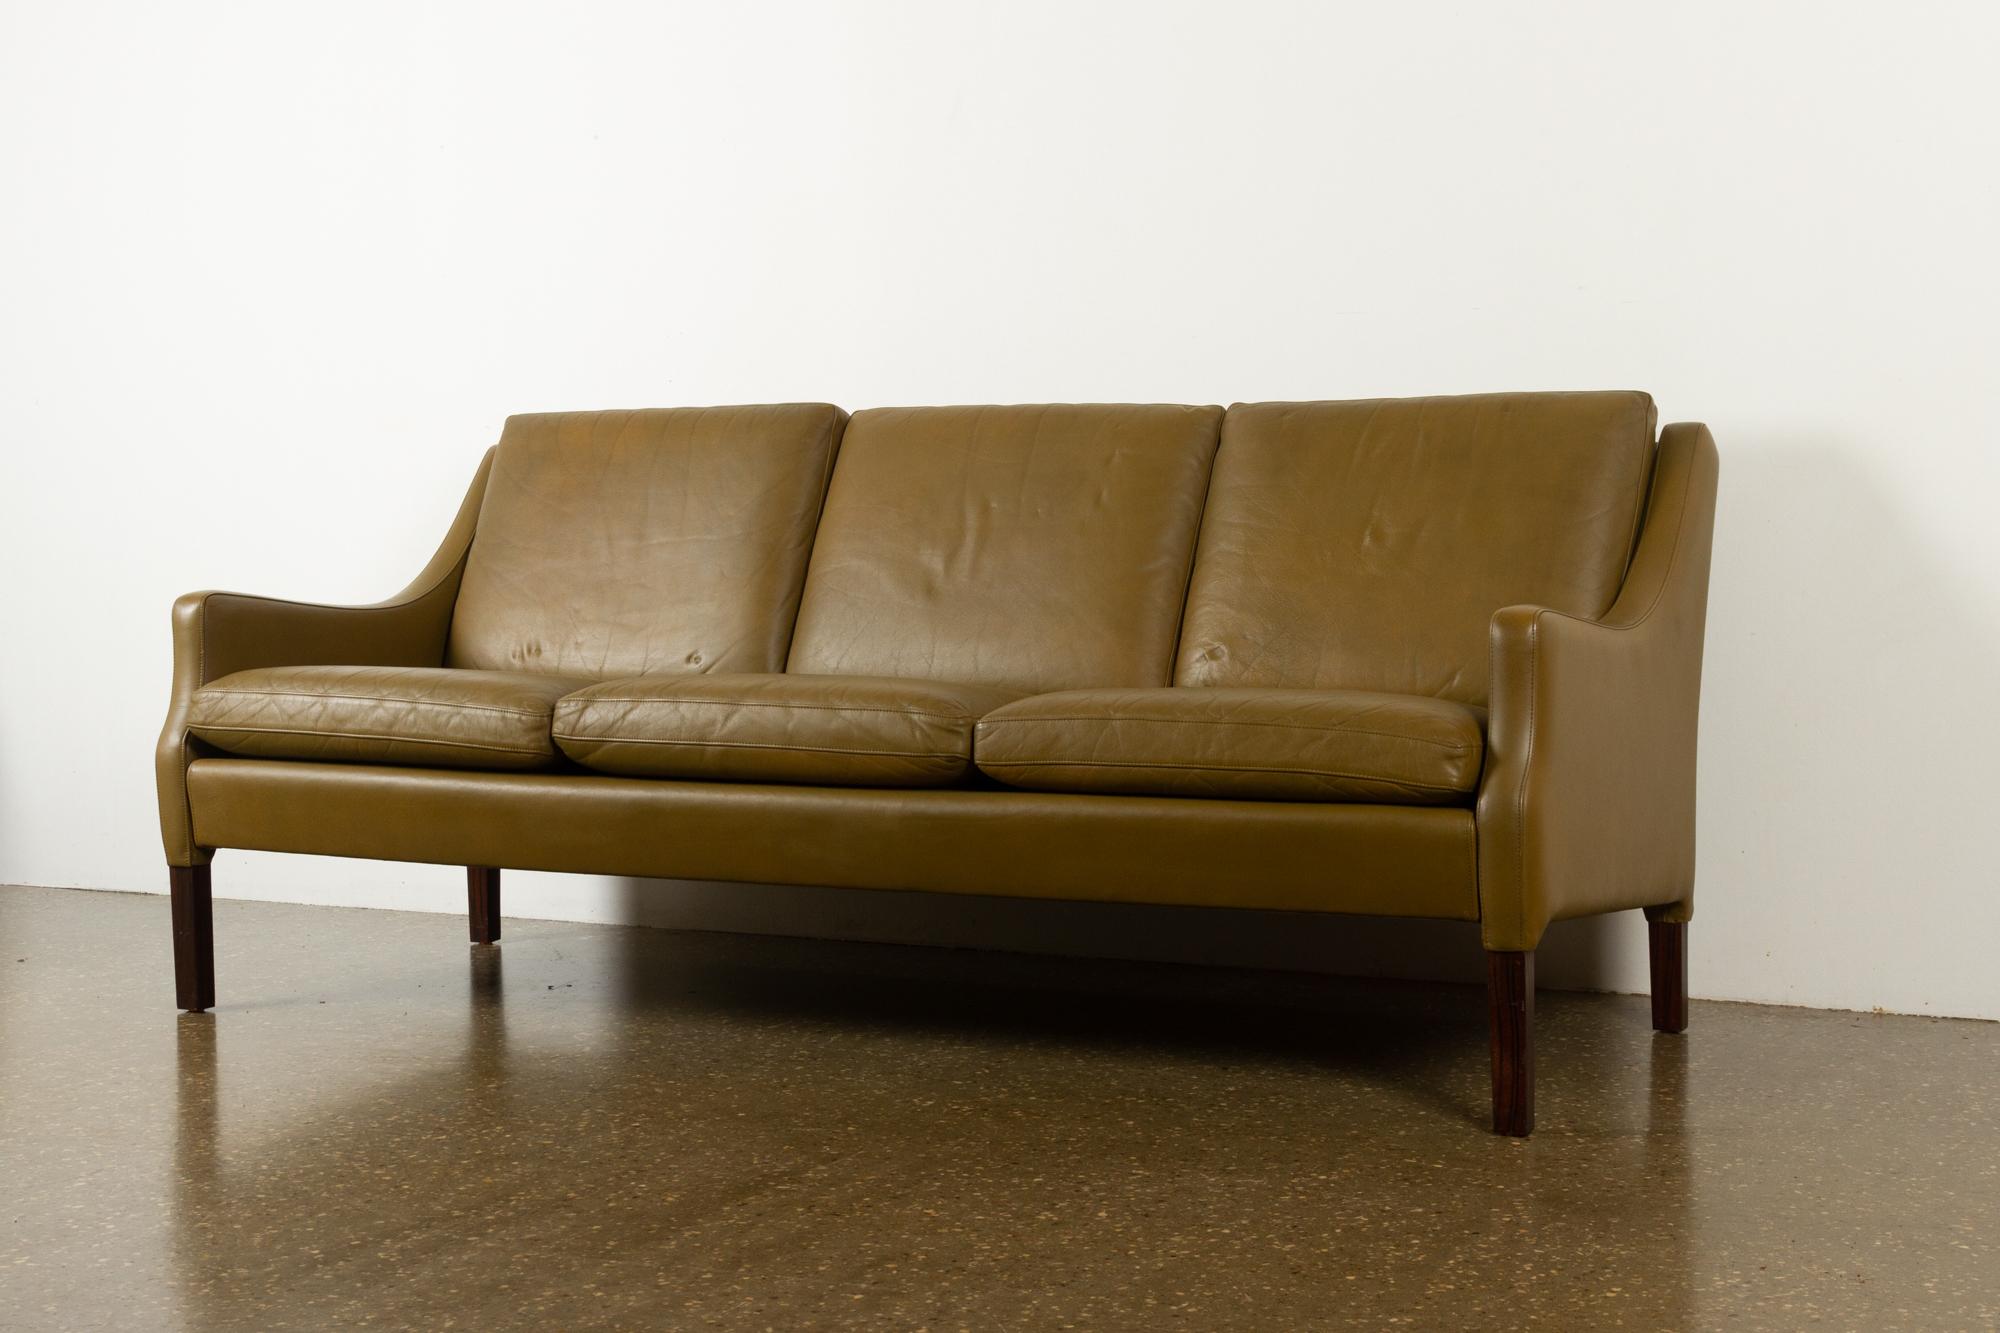 Vintage Danish olive green leather sofa, 1960s
Very stylish Mid-Century Modern Danish three-seat couch with original stunning olive green leather upholstery. Beautifully curved armrests. Comfortable with thick and soft seat cushions, leather is